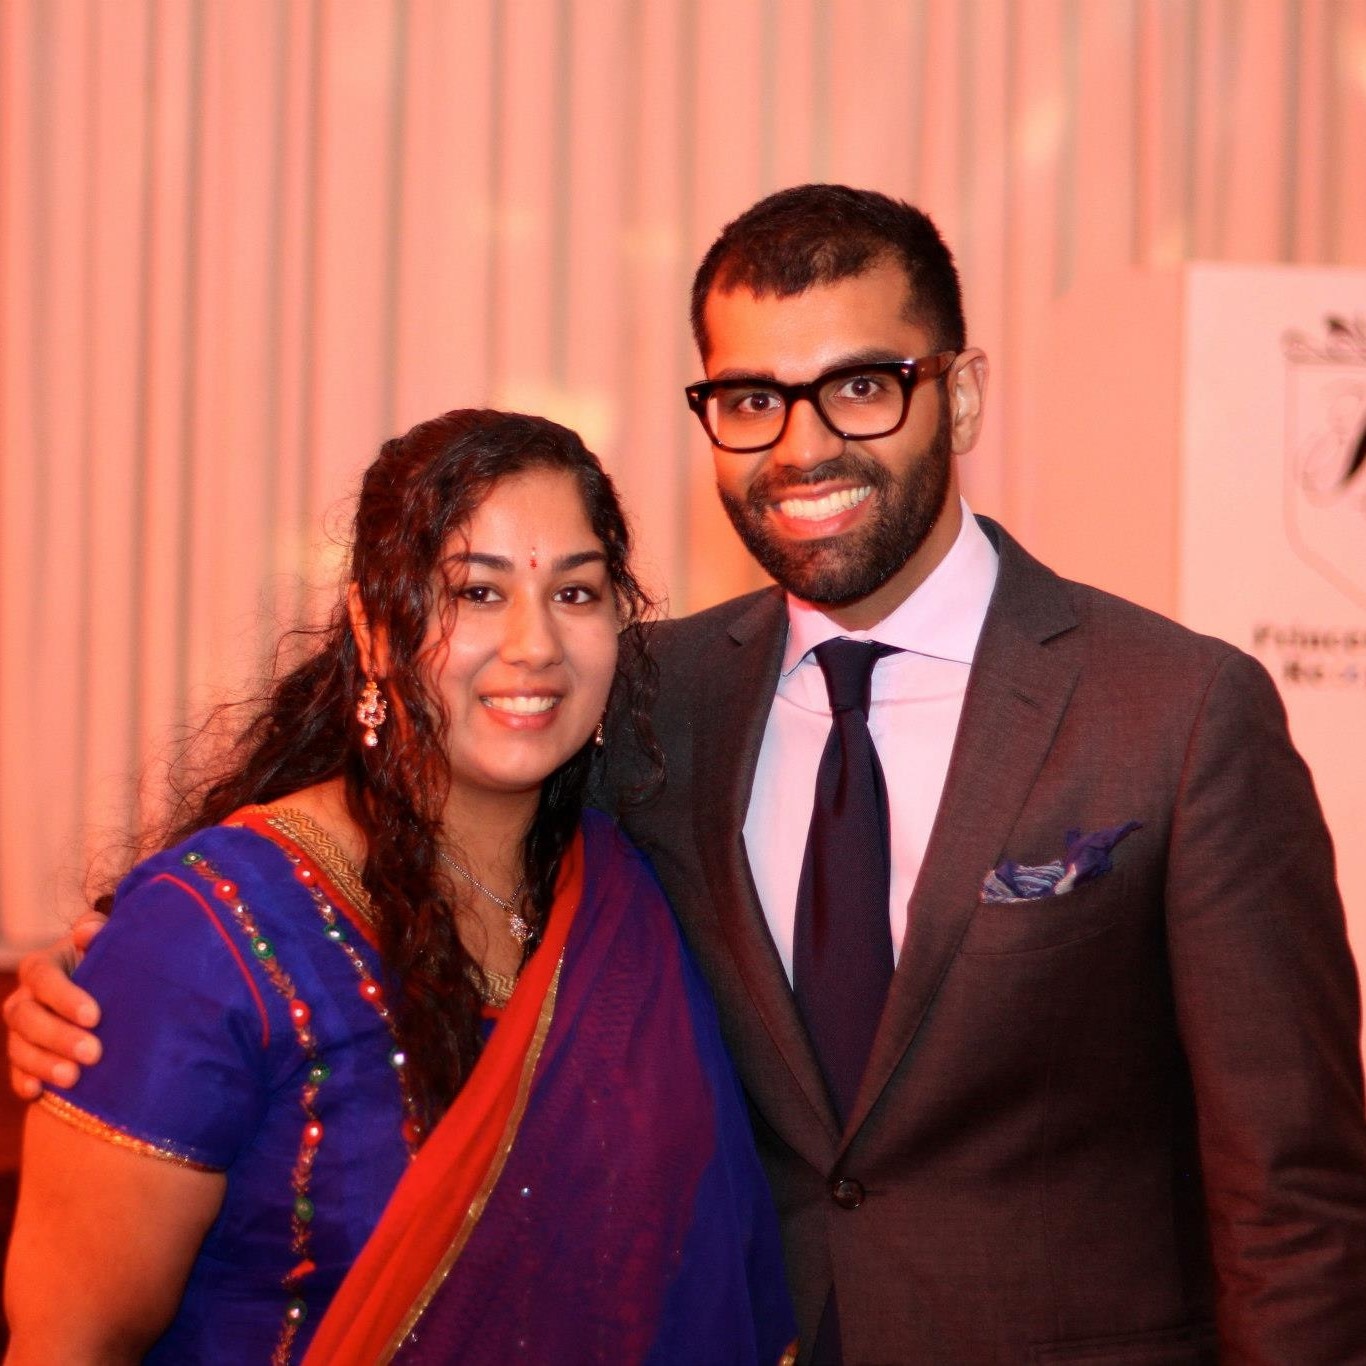 Tarang Chawla (right) with her sister Nikita, who was murdered by her husband in 2015.